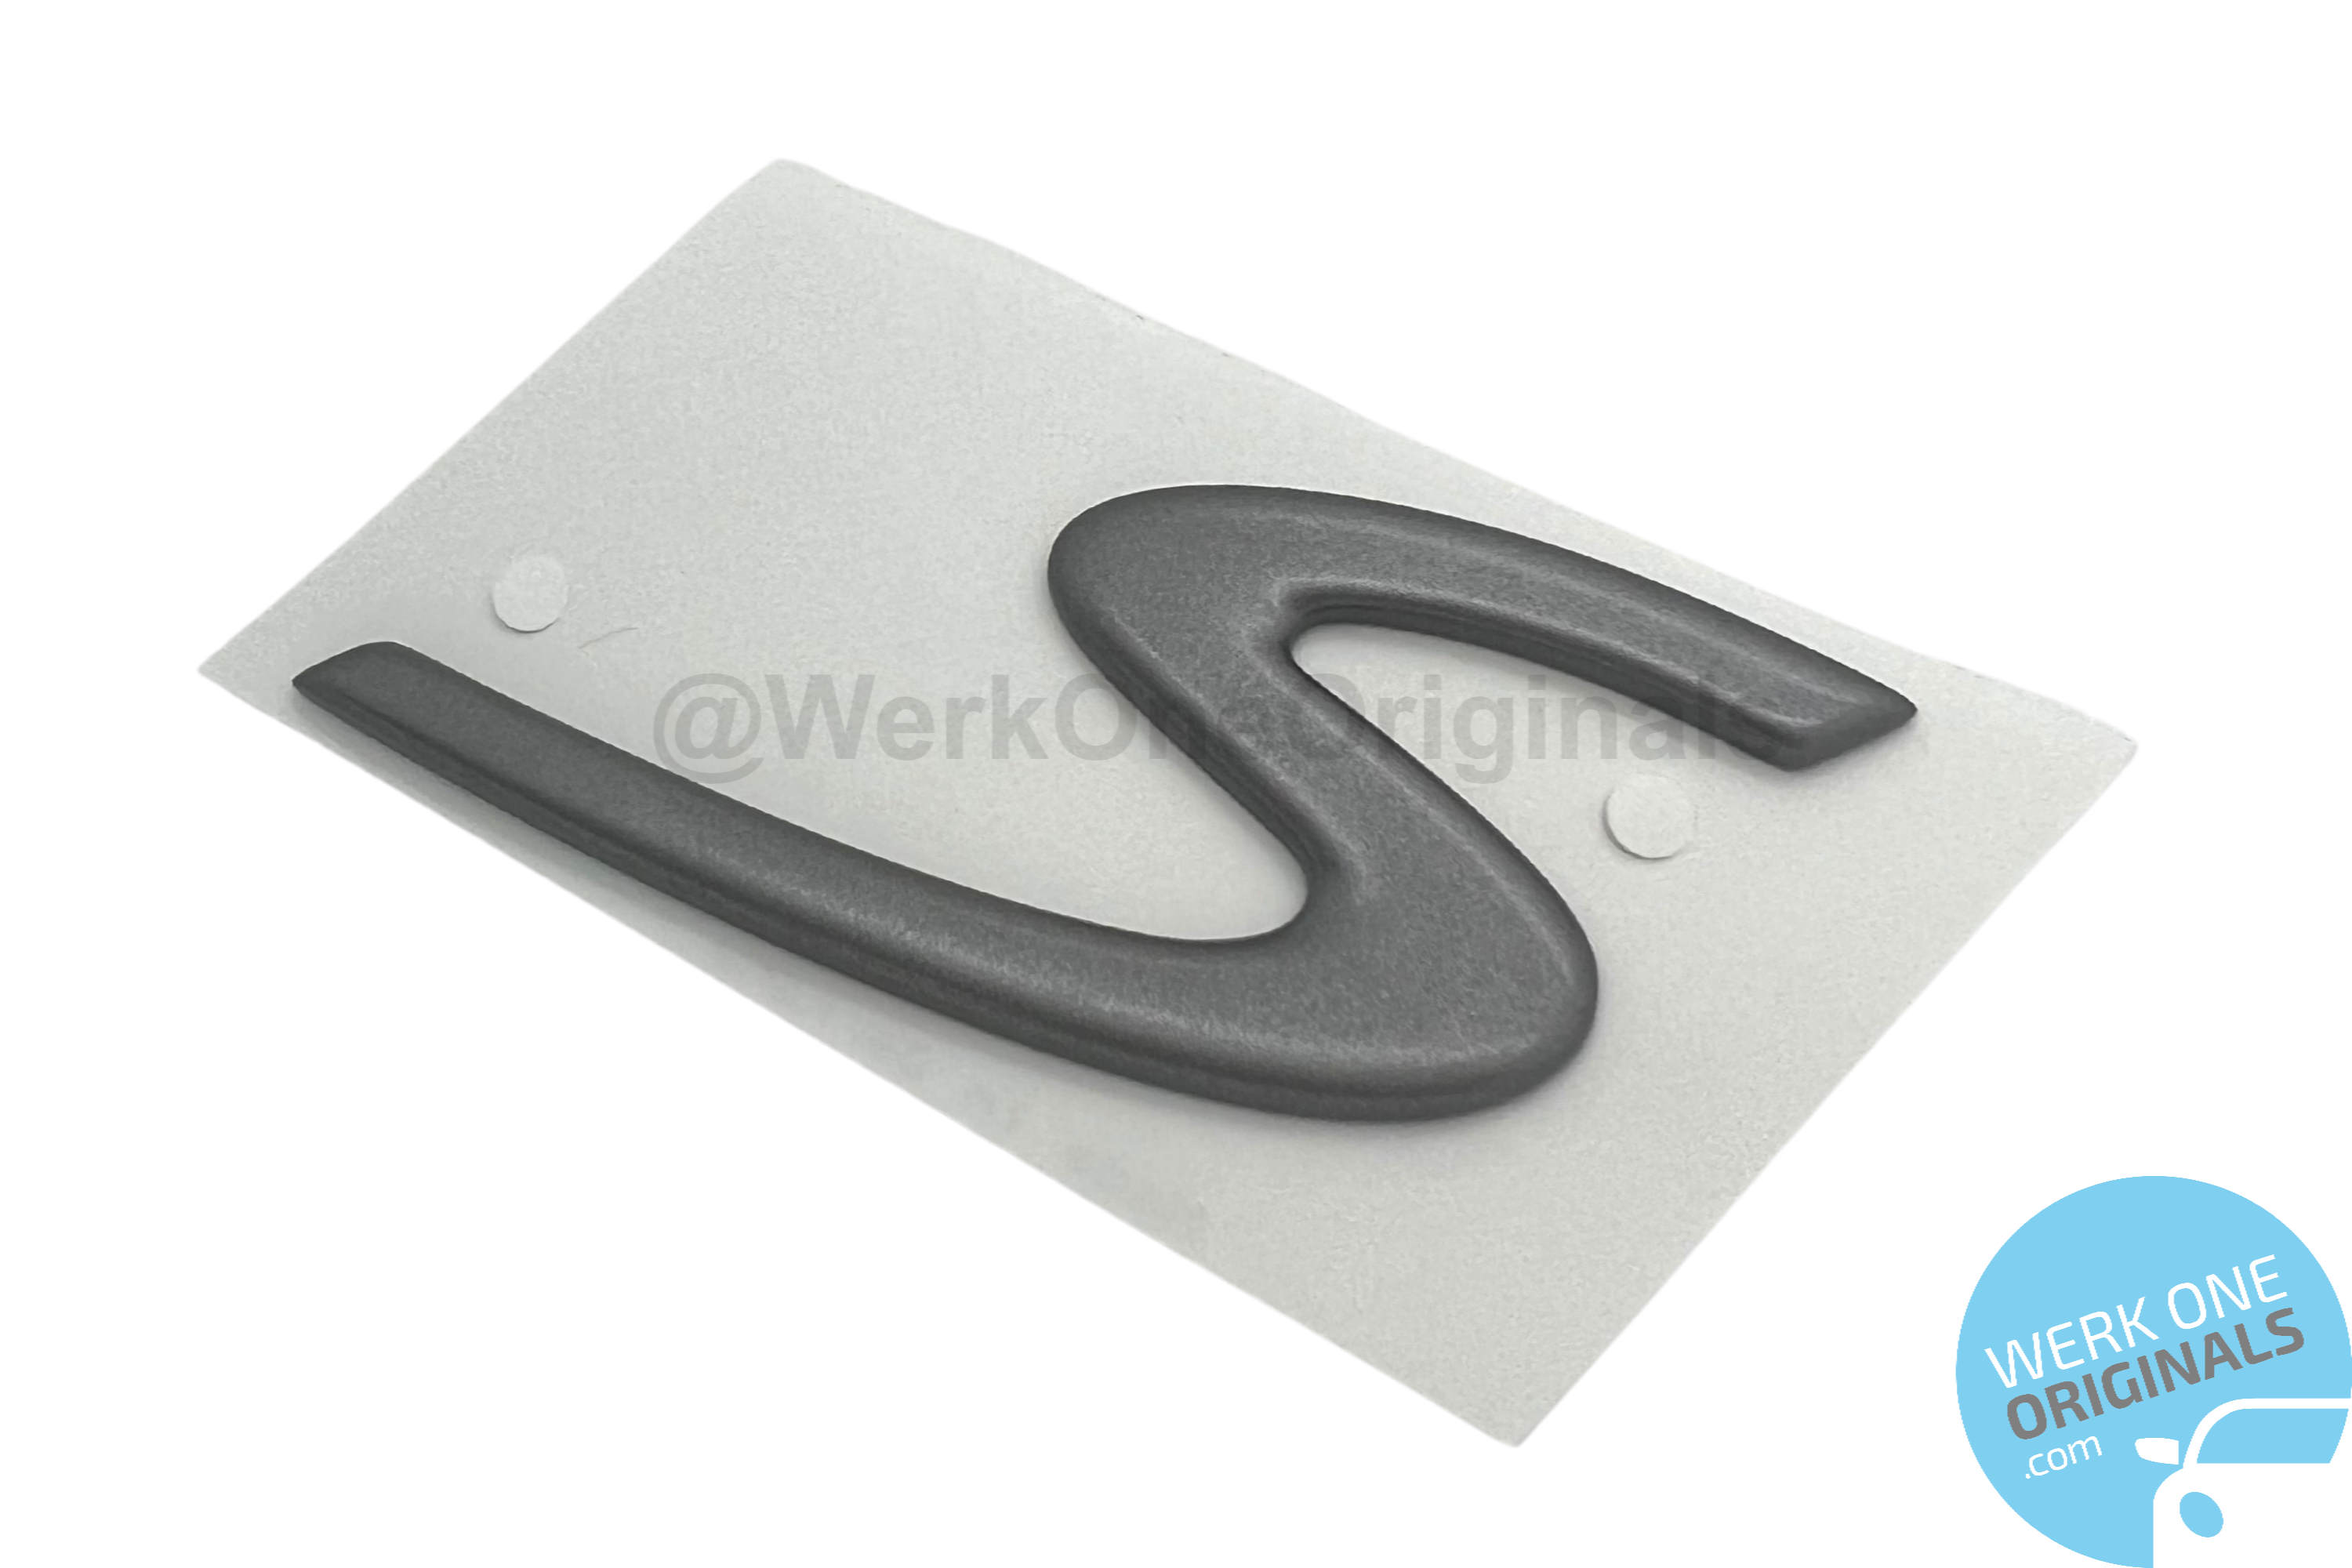 Official Porsche 'Boxster S' Rear Badge in Titanium Grey for Boxster S Type 987 Models